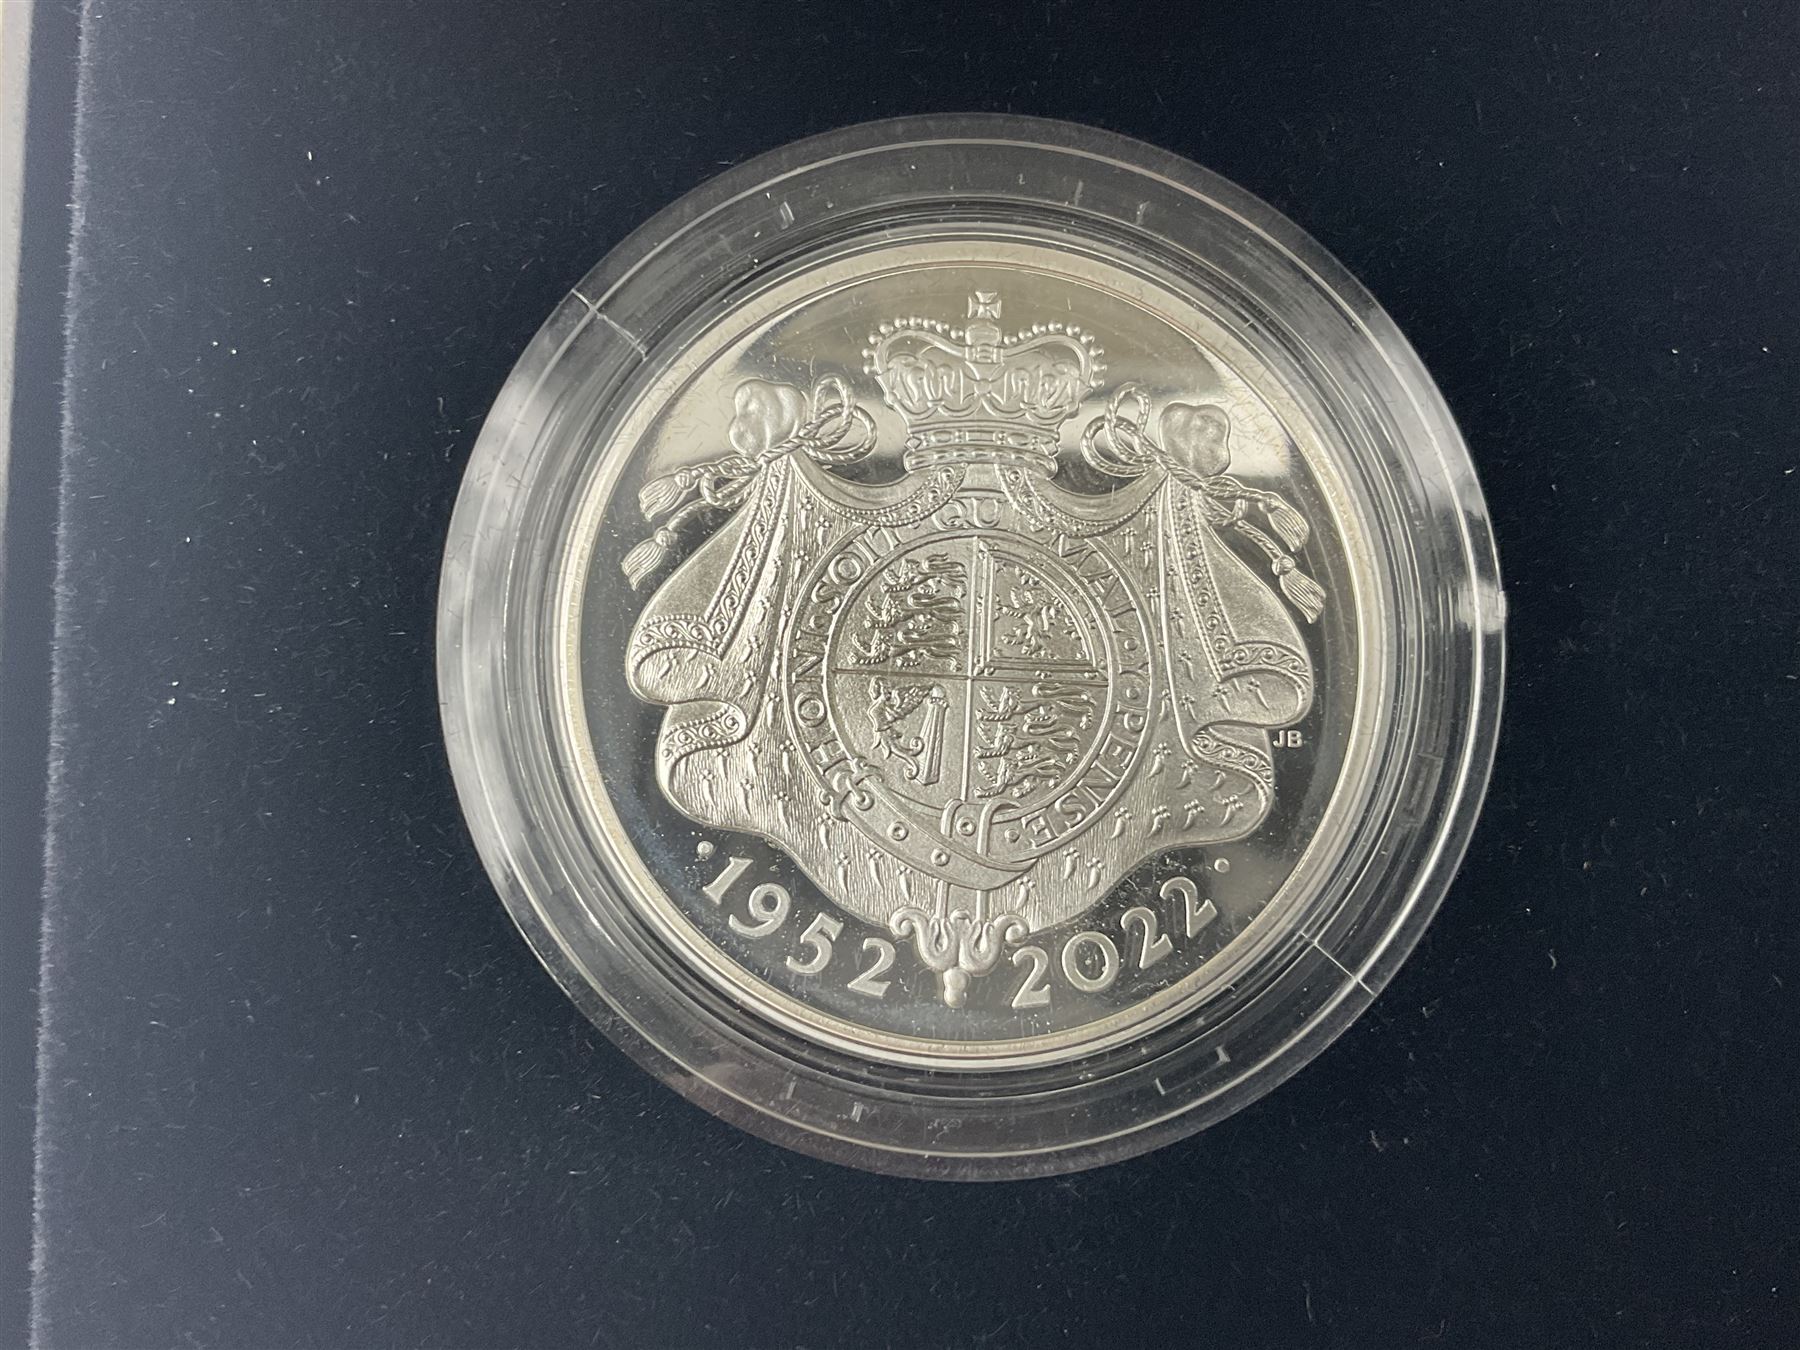 The Royal Mint United Kingdom 2022 'The Platinum Jubilee of Her Majesty The Queen' silver proof pied - Image 5 of 7